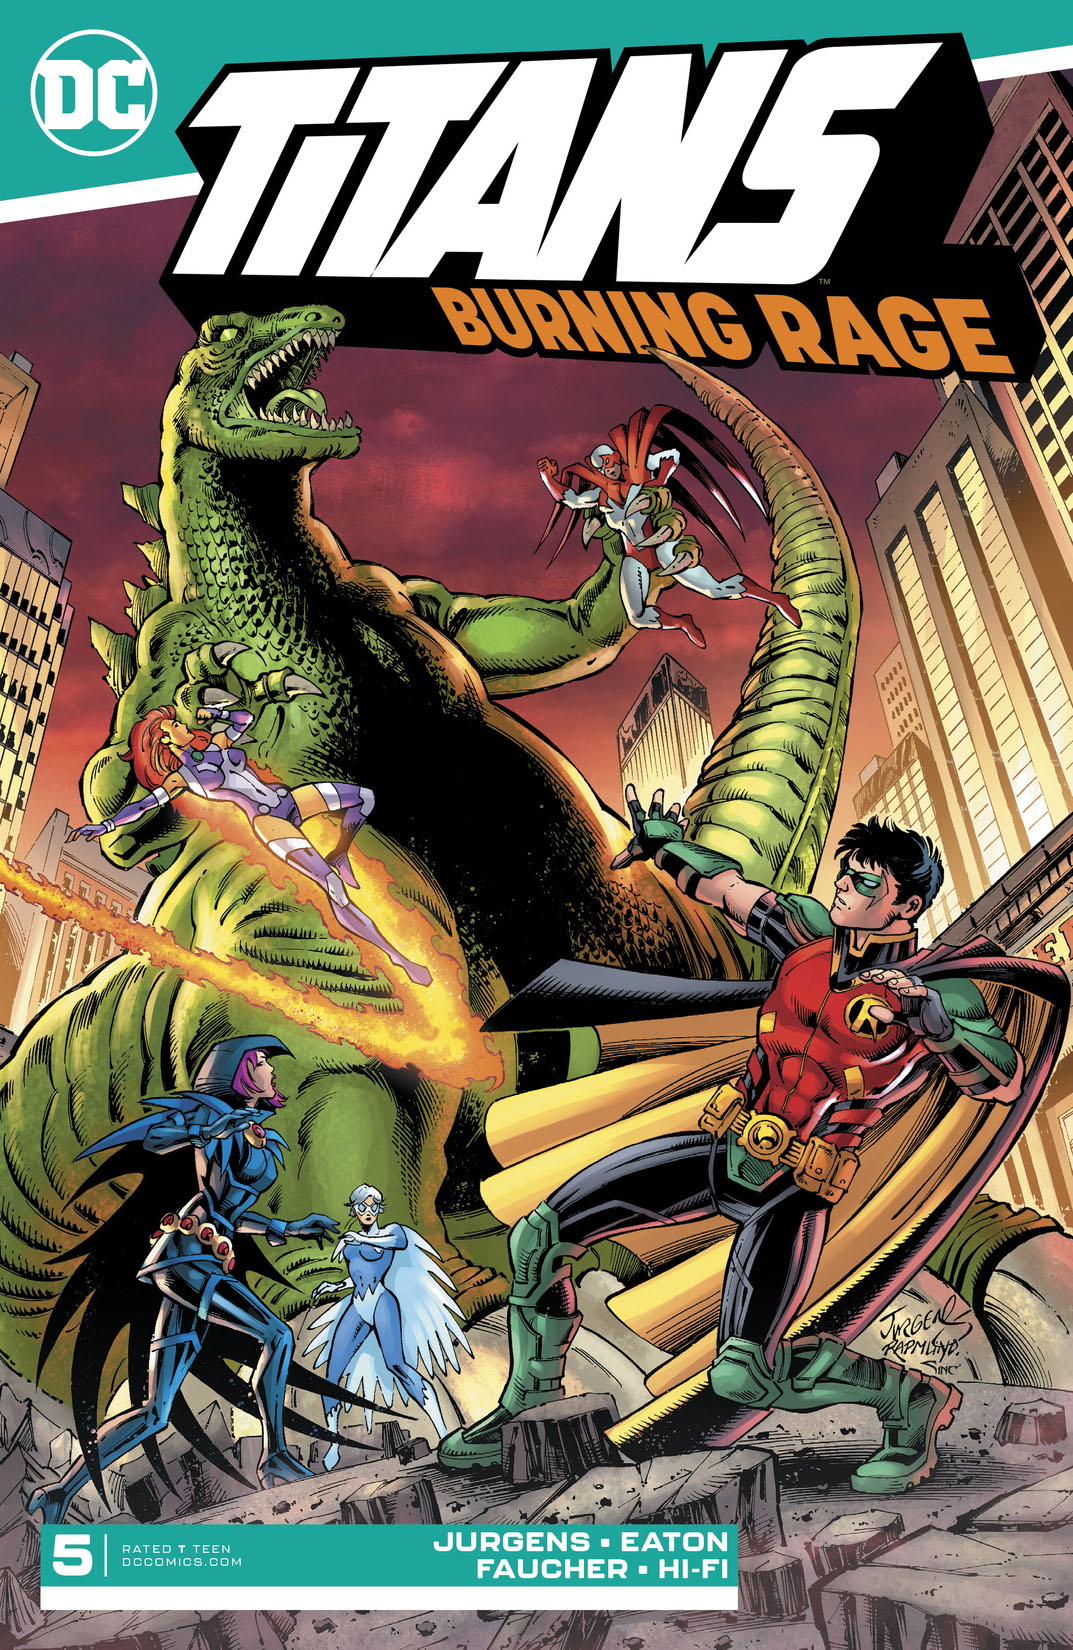 Titans: Burning Rage #5 preview images